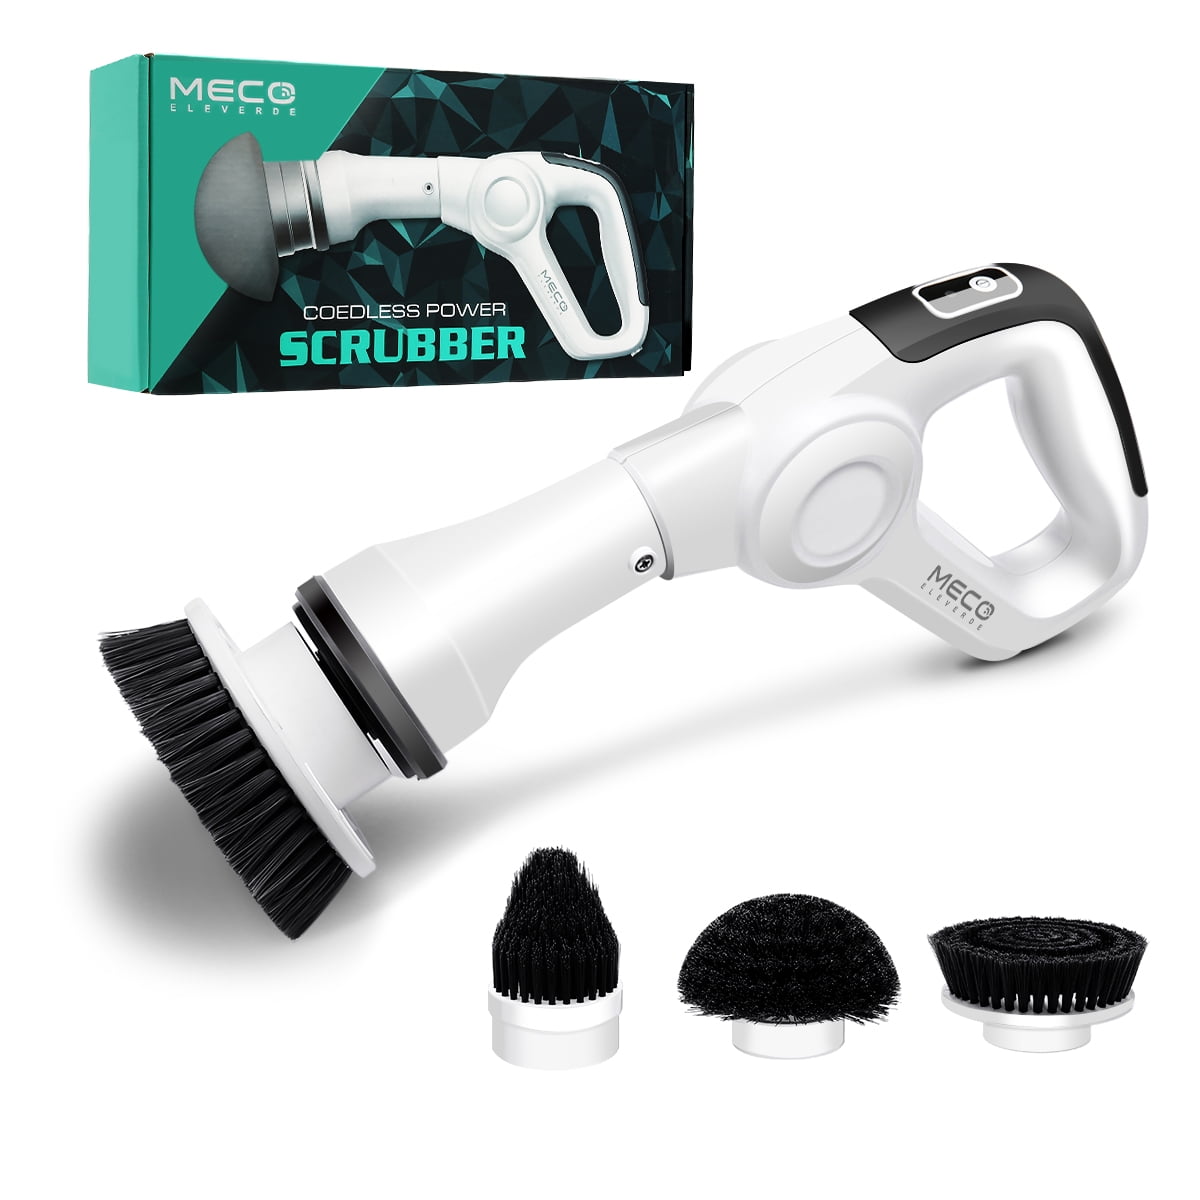 Handheld Electric Spin Scrubber, MACMORE Electric Brush with 4 Replaceable  Cleaning Heads and 9 Scouring Pads, Blasting Sponge, Electric Power